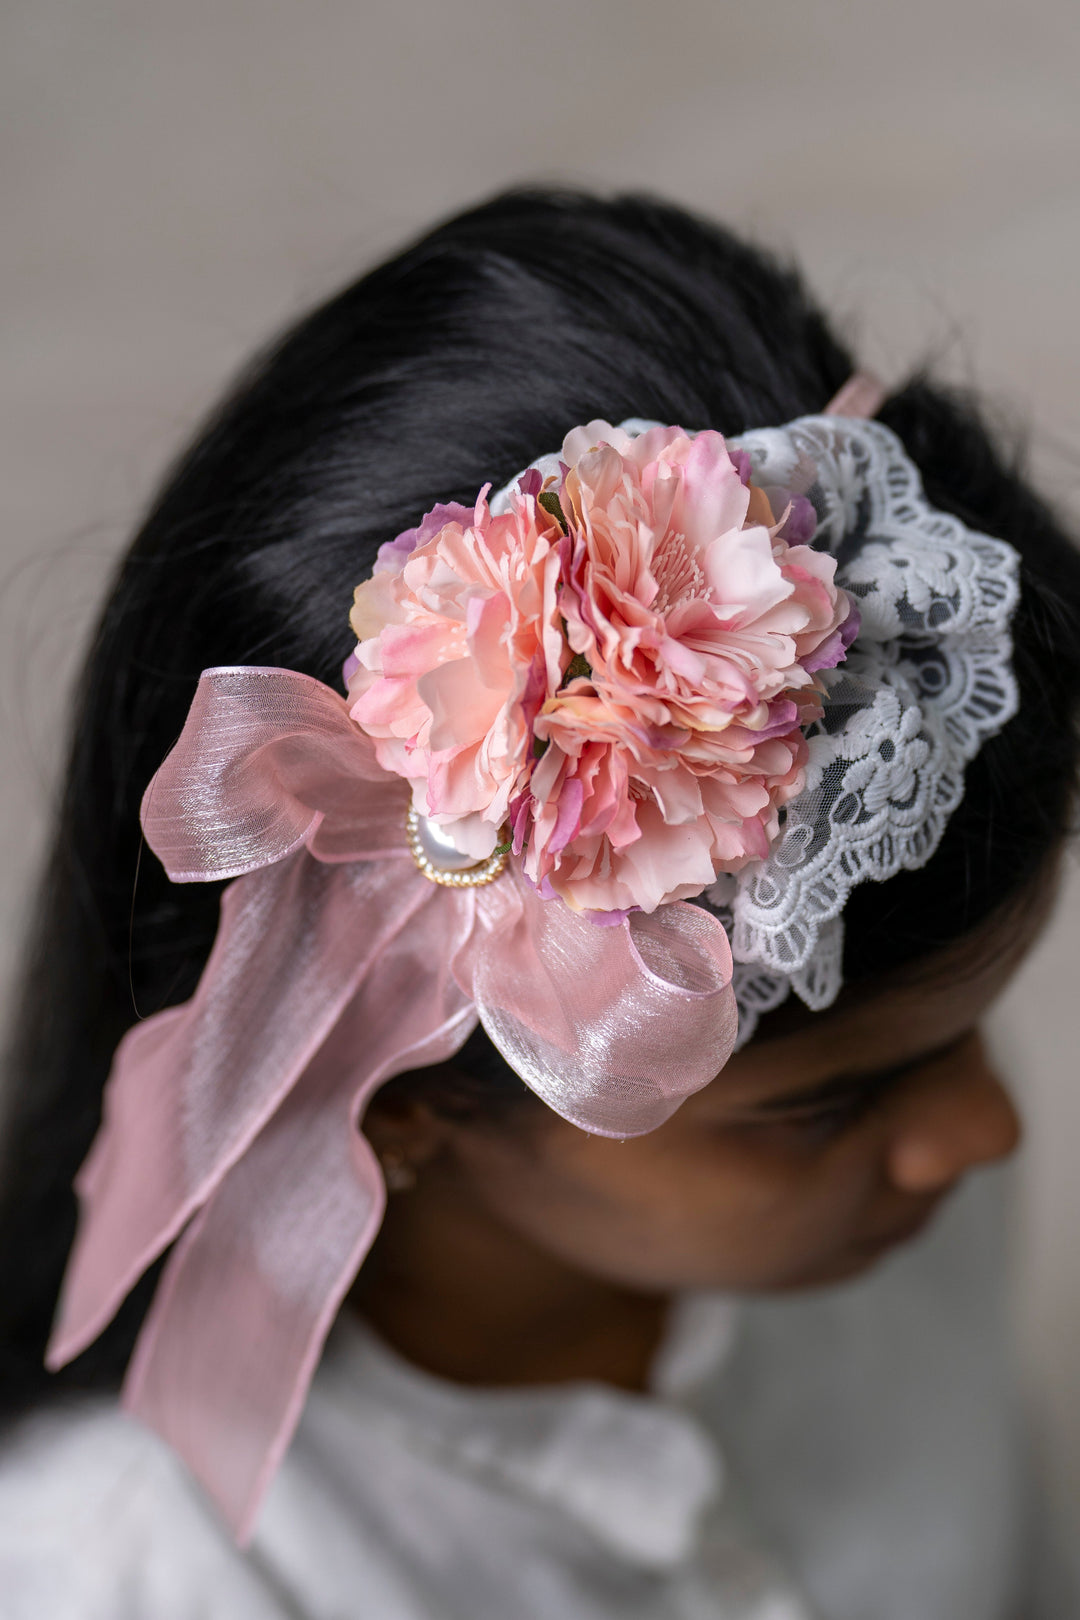 The Nesavu Hair Band Blush Pink Carnation Lace Hairband with Satin Bow Nesavu Pink JHB83B Charming Blush Pink Floral Lace Hairband | Perfect Wedding & Special Occasion Accessory